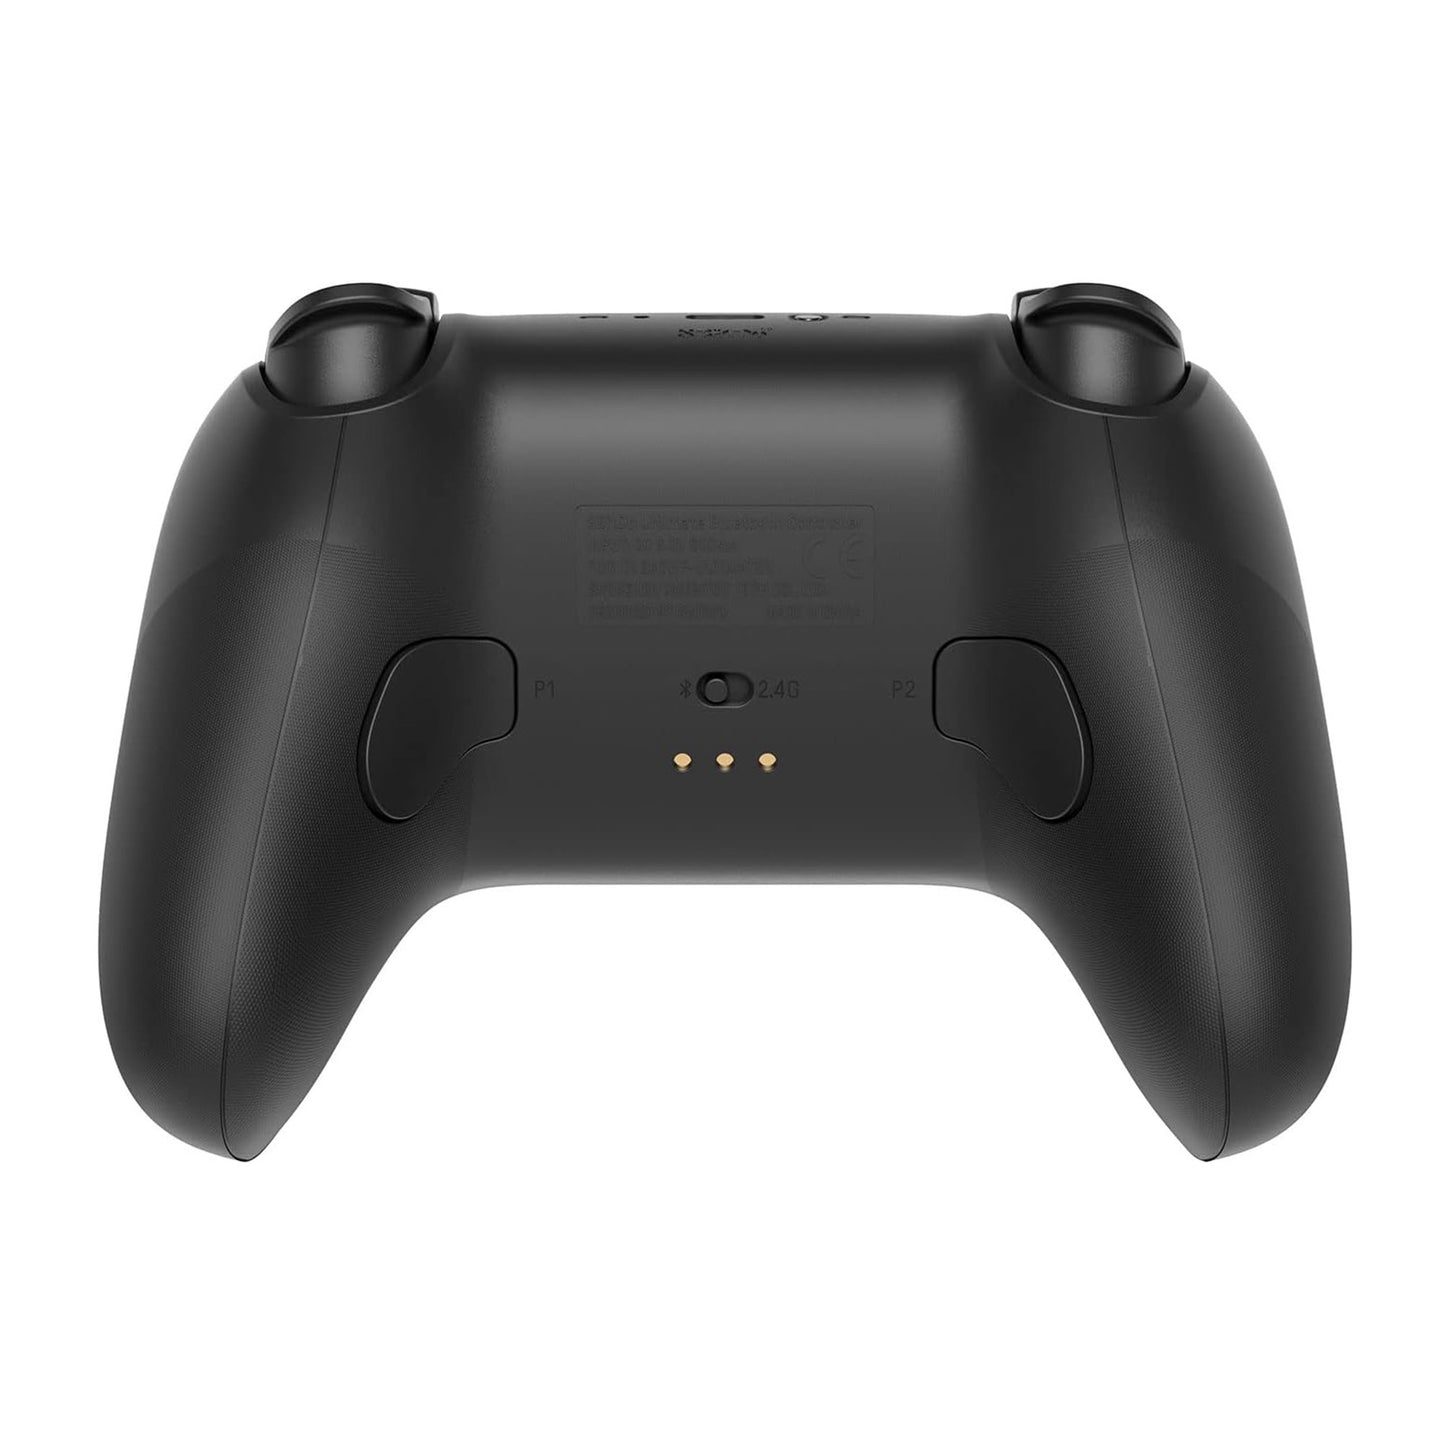 8BitDo Ultimate BT Controller for Nintendo Switch and PCs with dock - Black - 15-11981